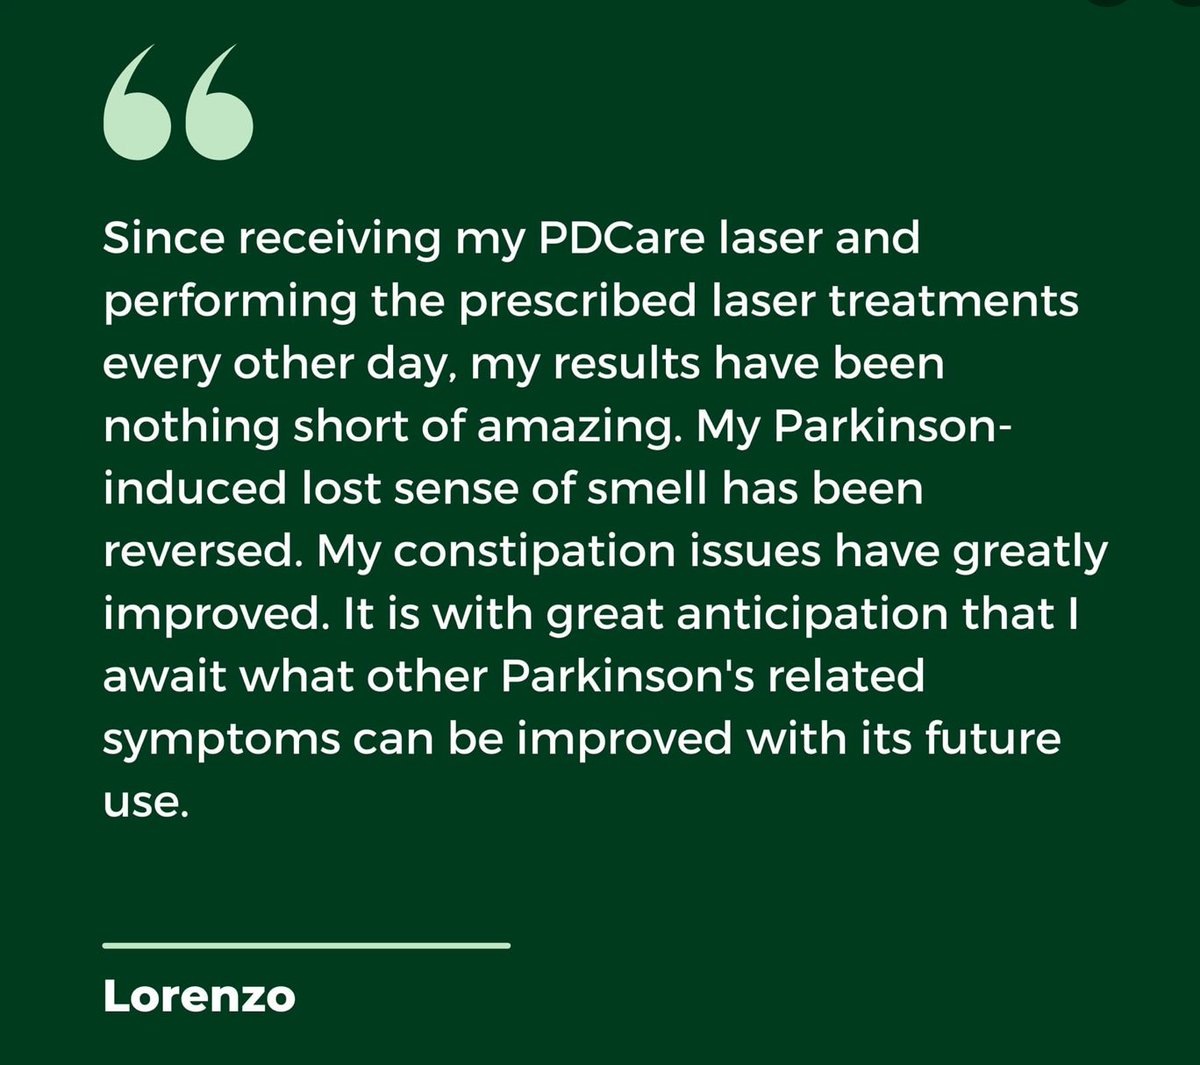 Great news from Lorenzo, user of our PDCare infrared laser. He continues to use his usual PD medication as before  - as at home laser therapy does not interfere with meds. #parkinsons #photobiomodulation